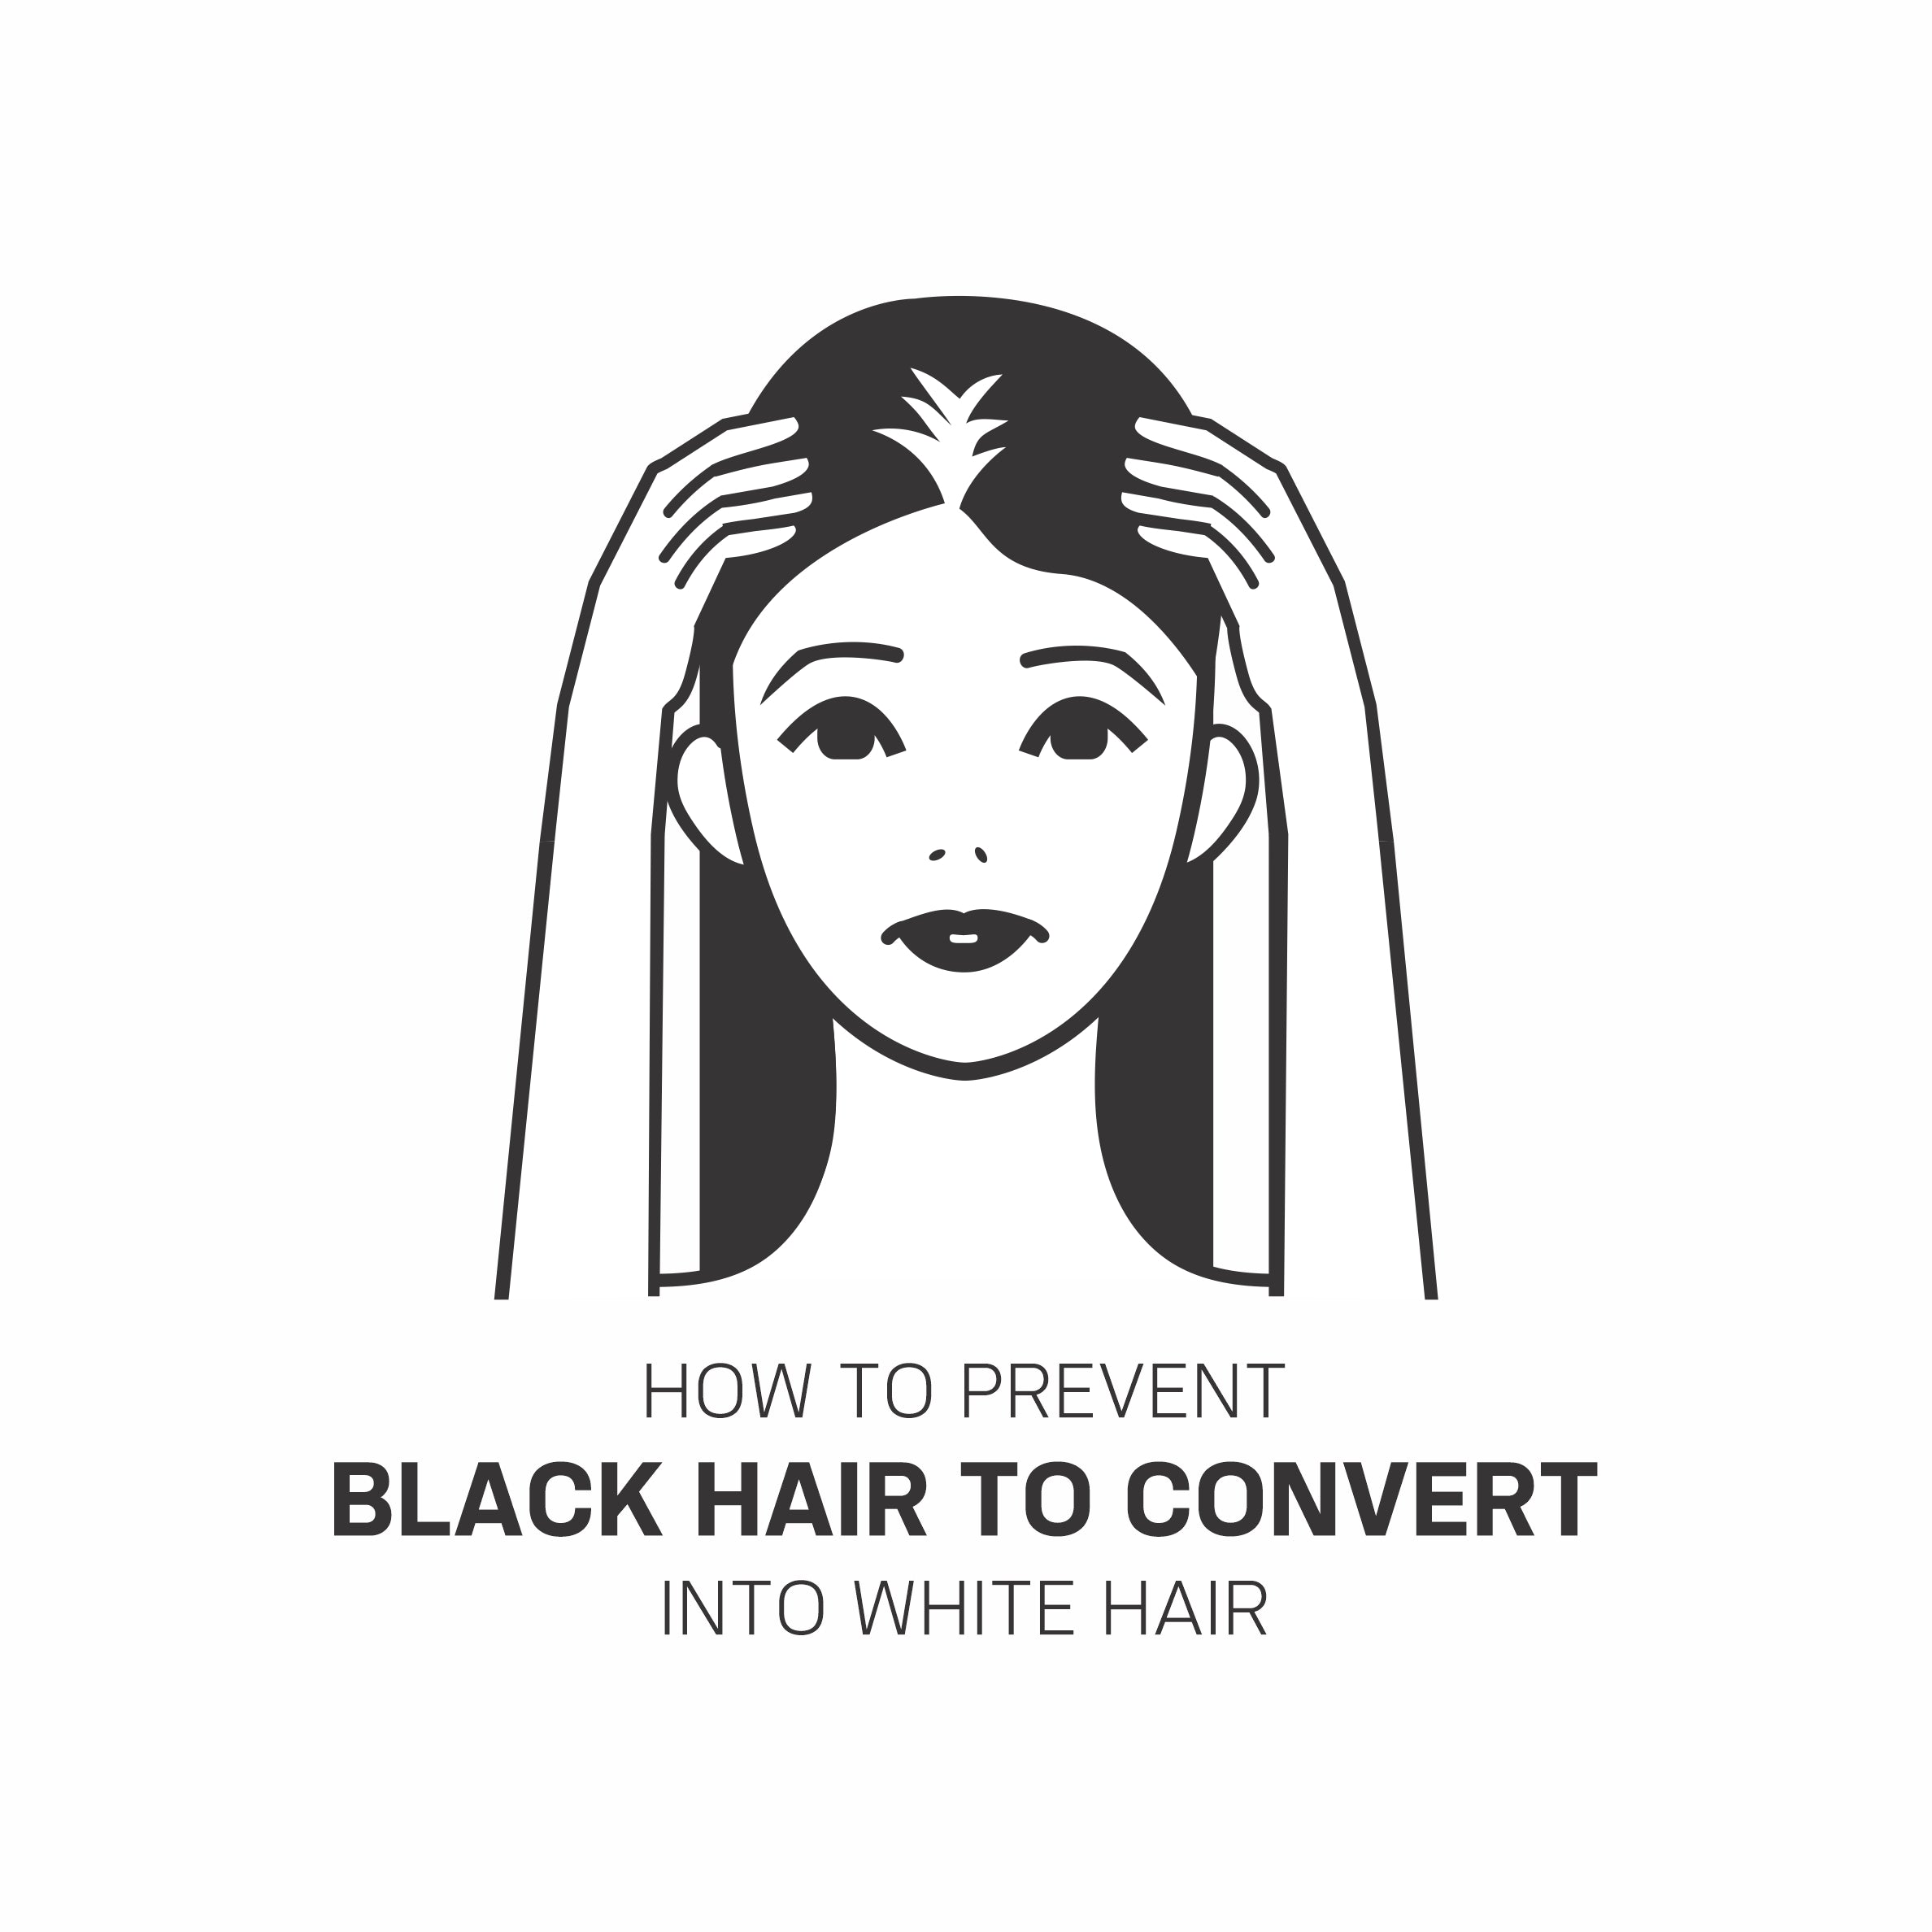 How to stop black hair conversion into white hair